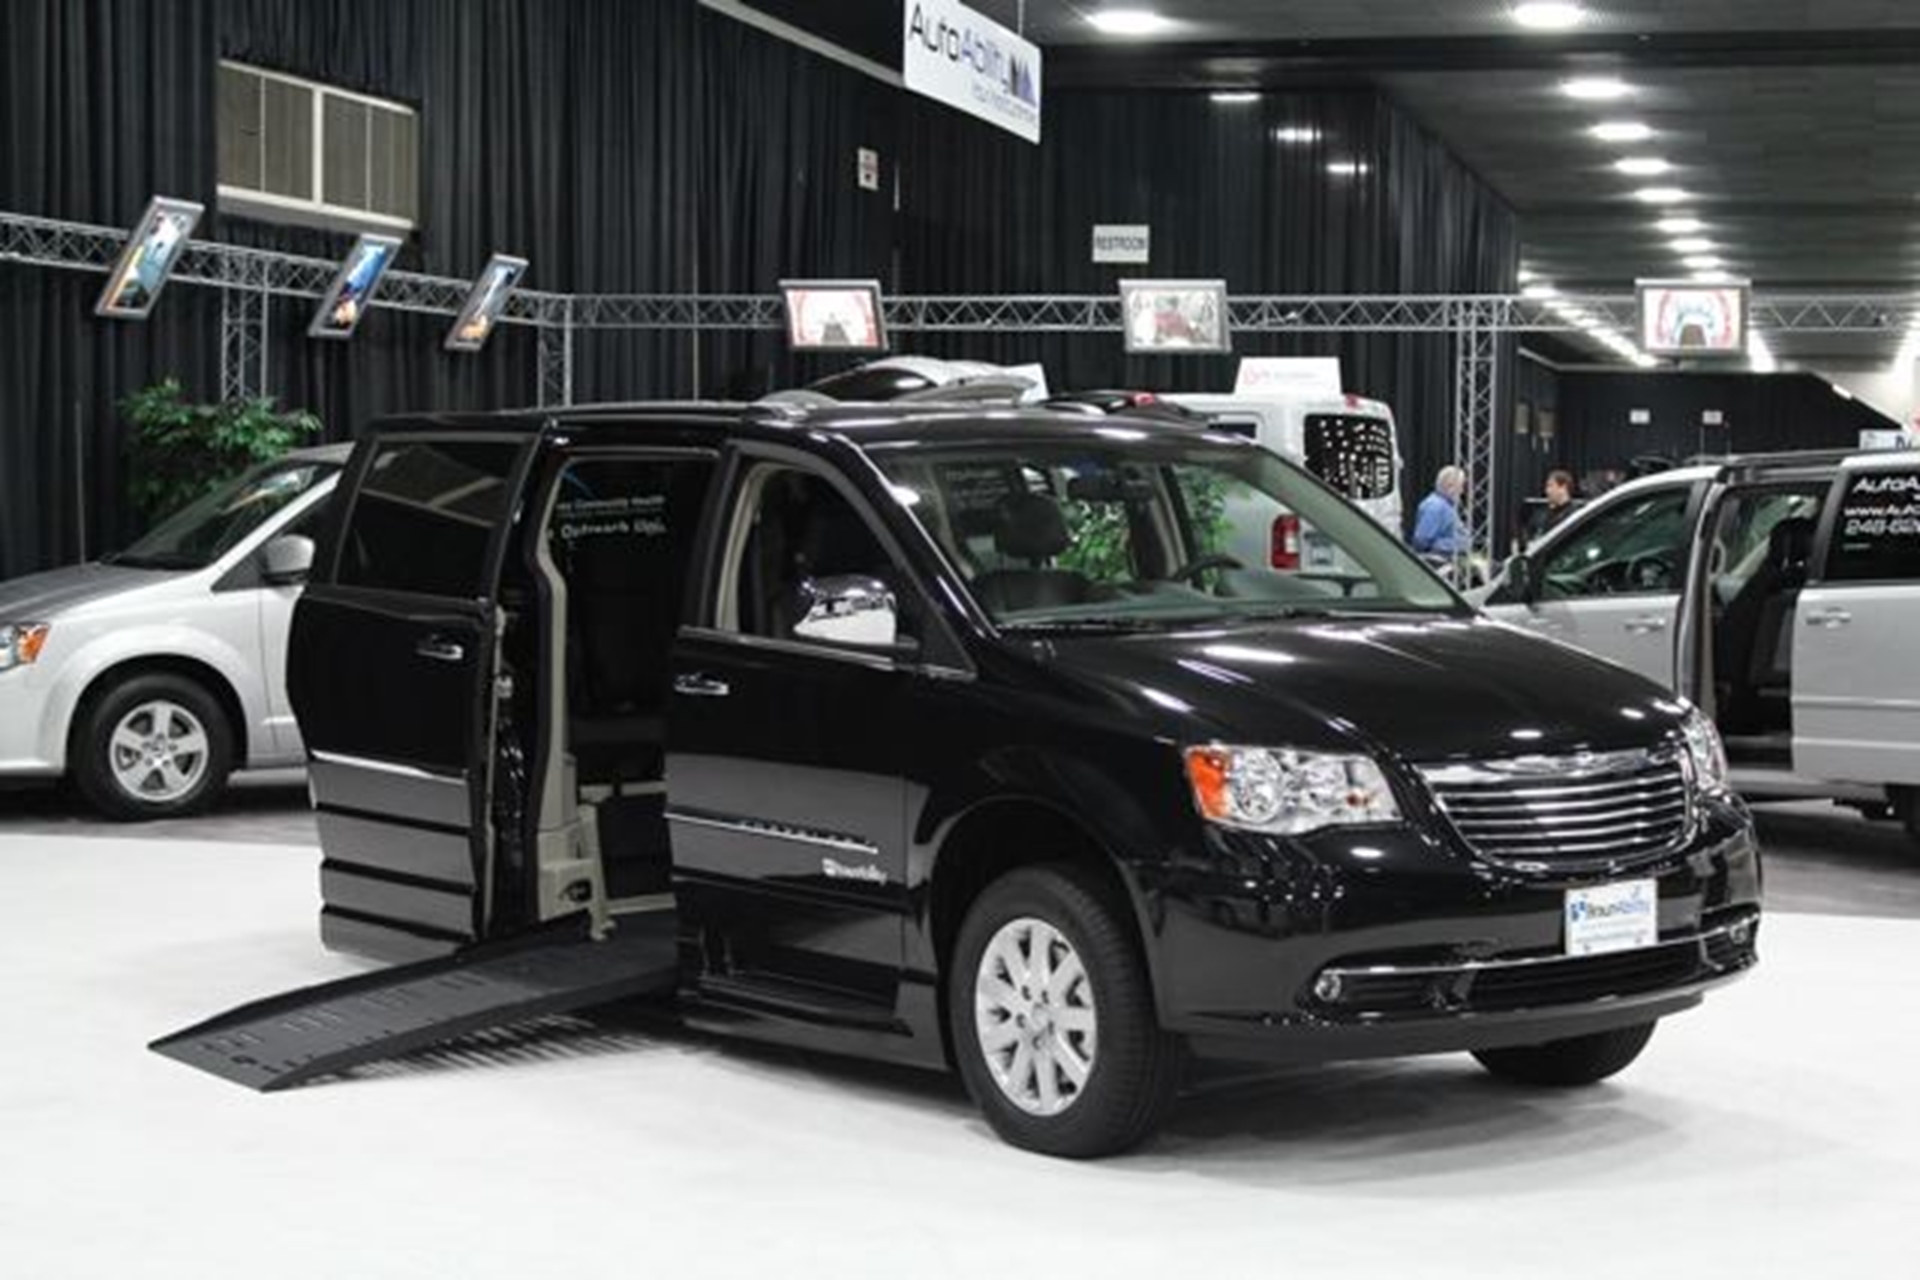 North American International Auto Show Chrysler Town & Country